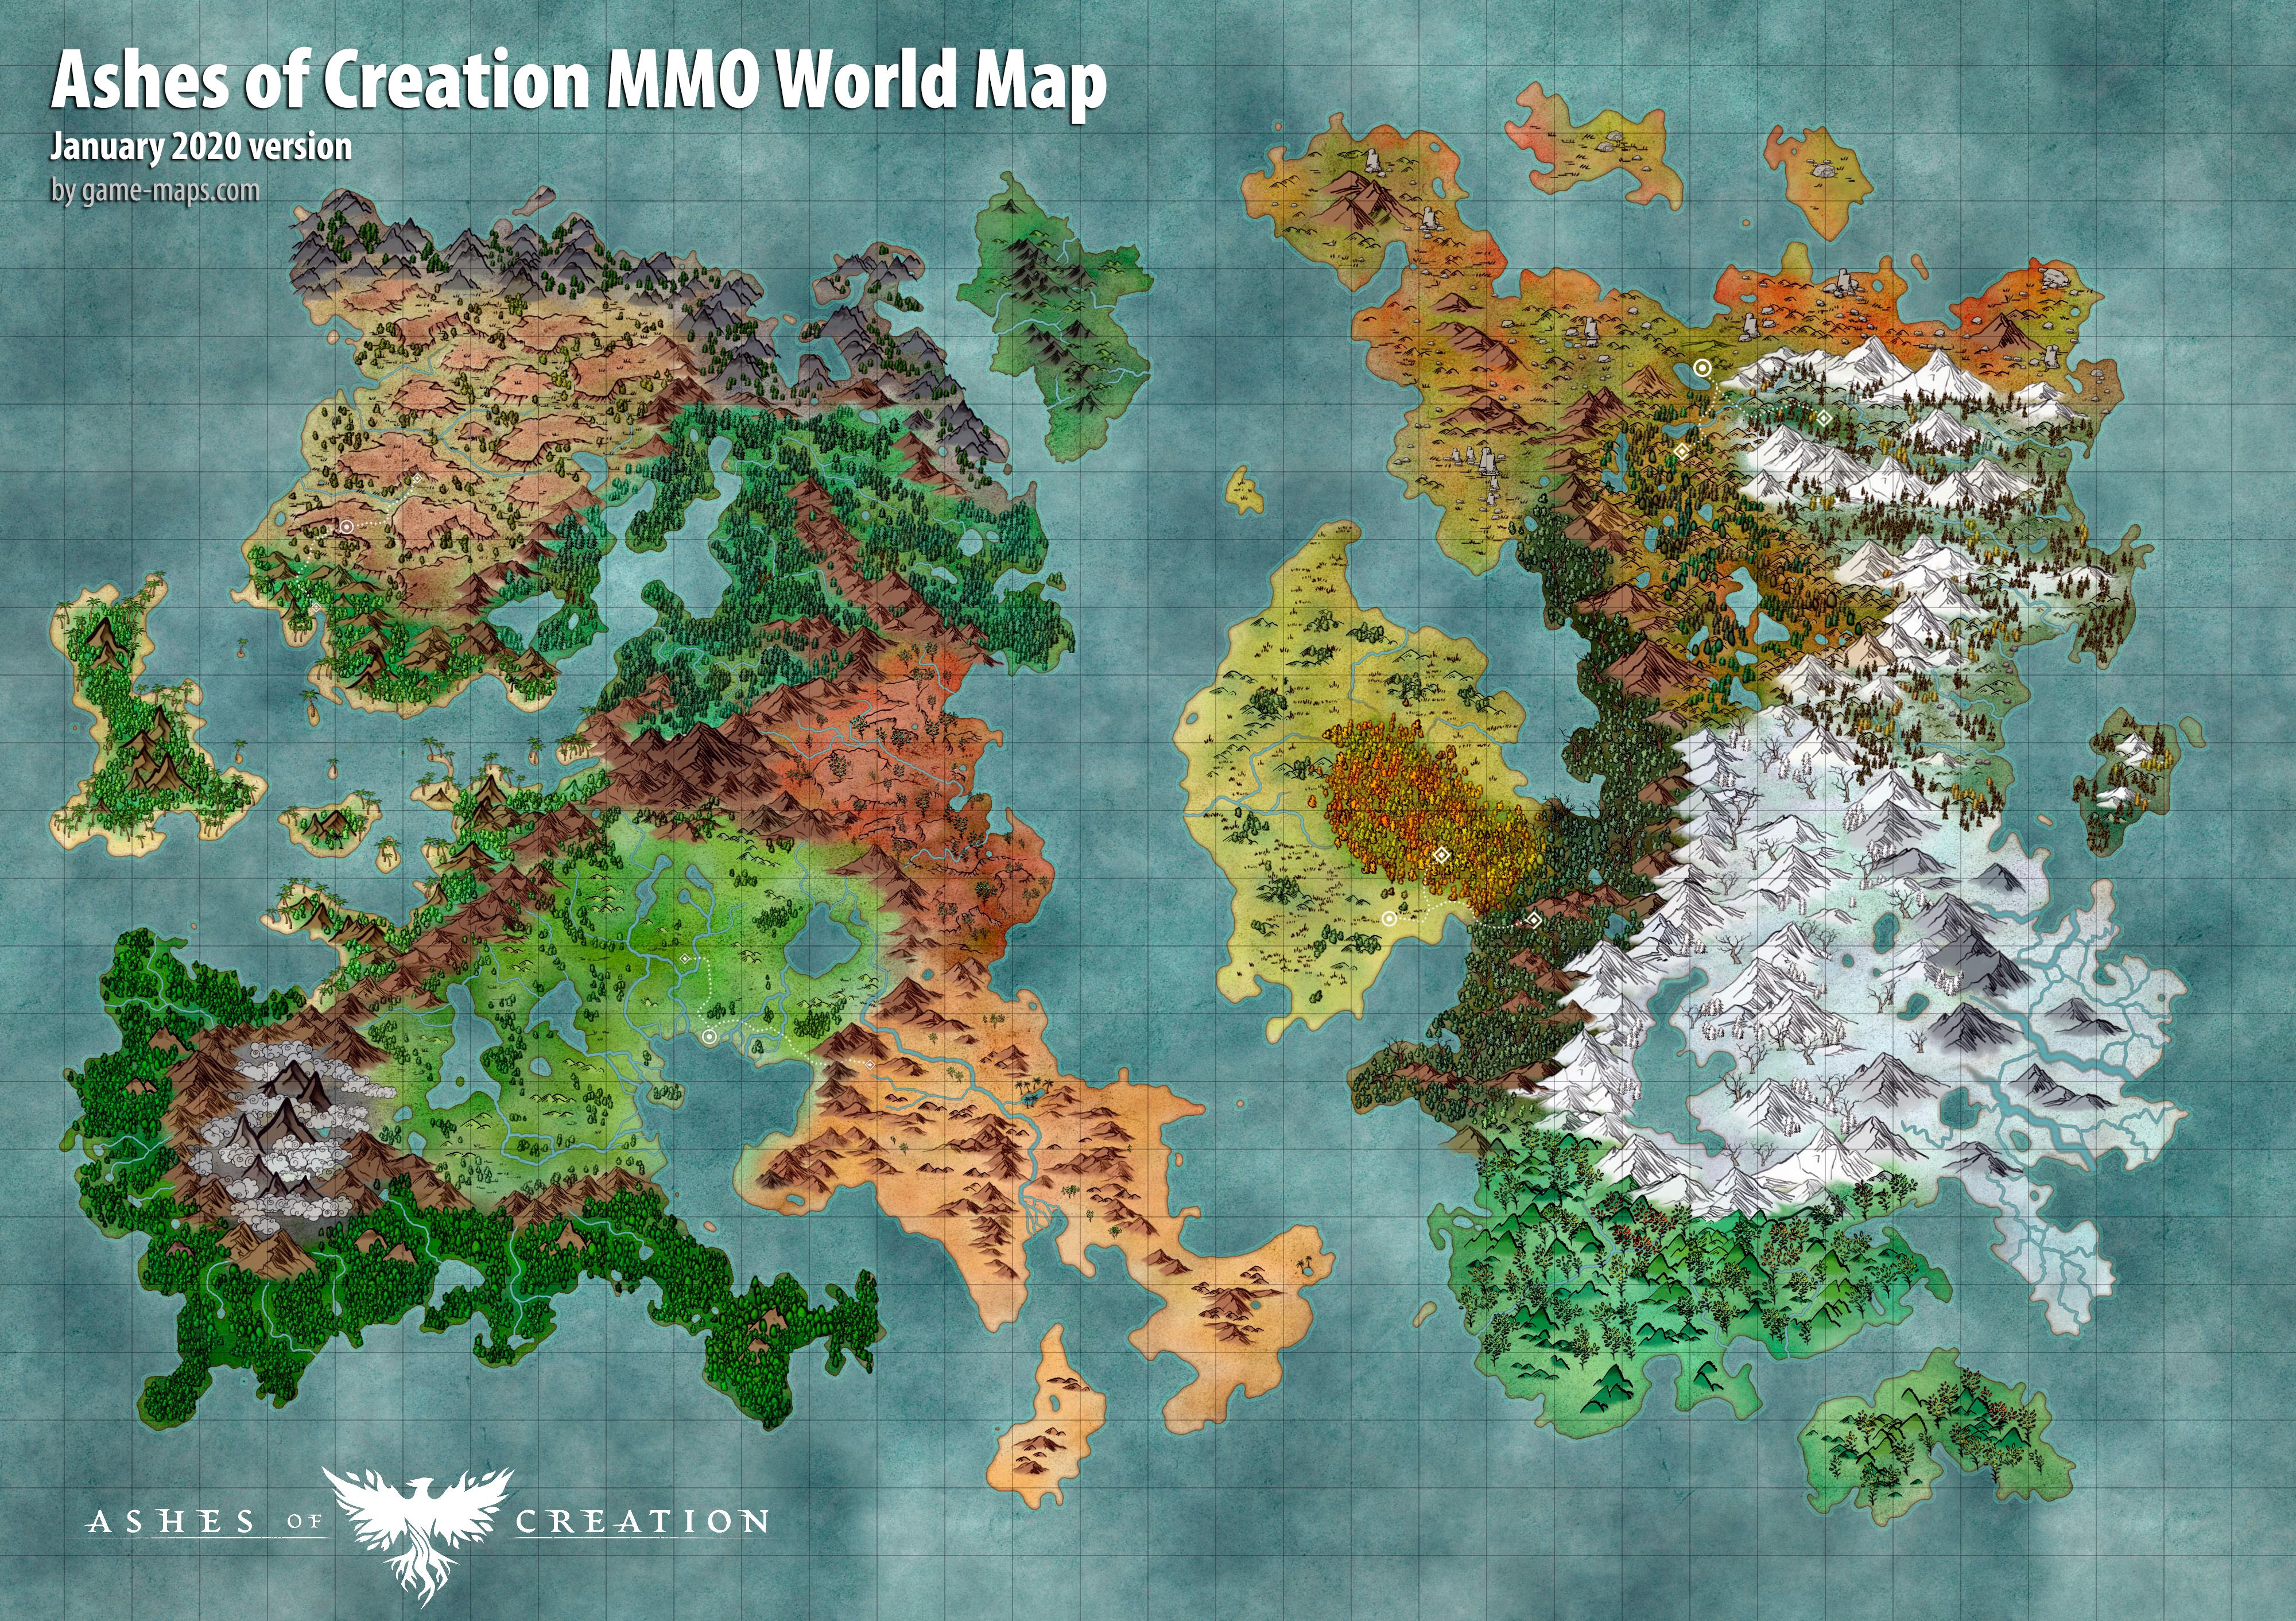 Ashes of Creation World Map - January 2020